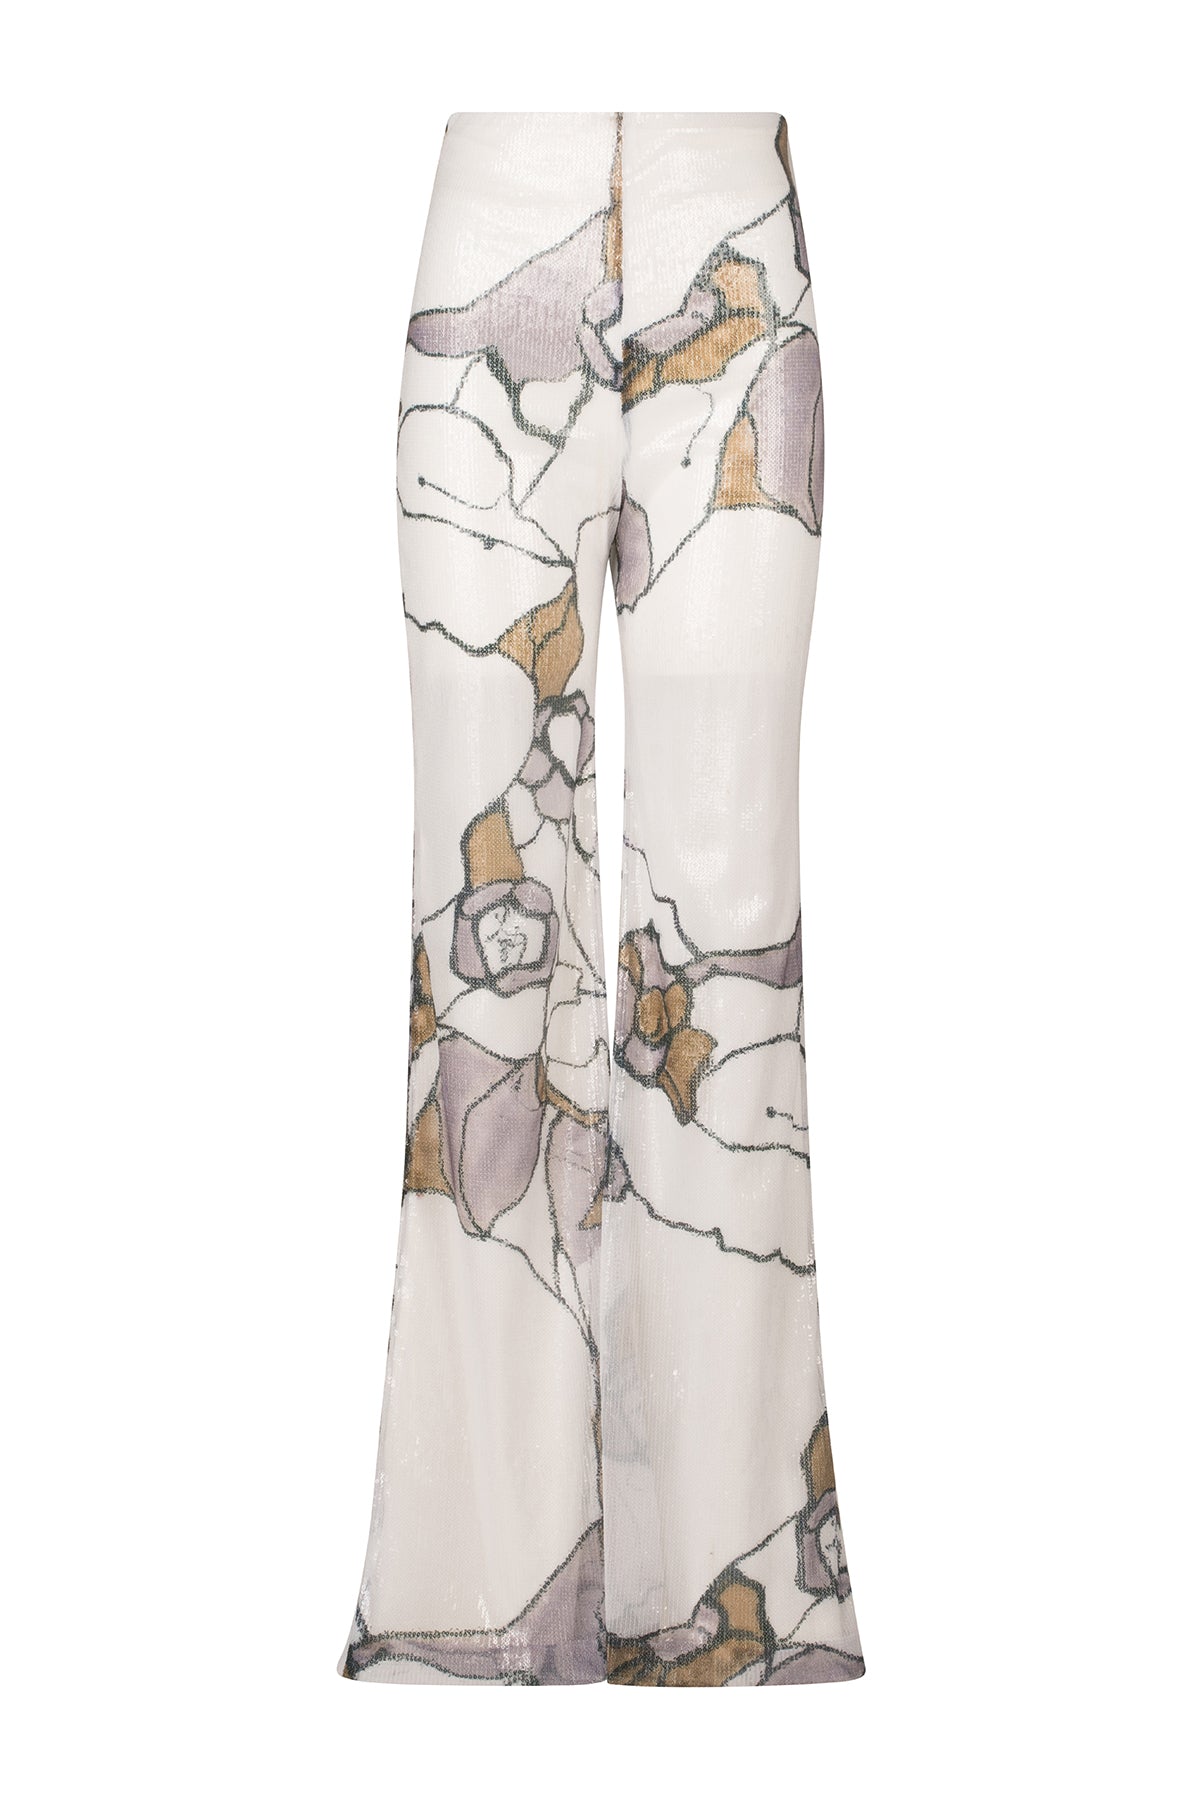 An image of Avellino Pant Ecru Marble with an abstract flower print.